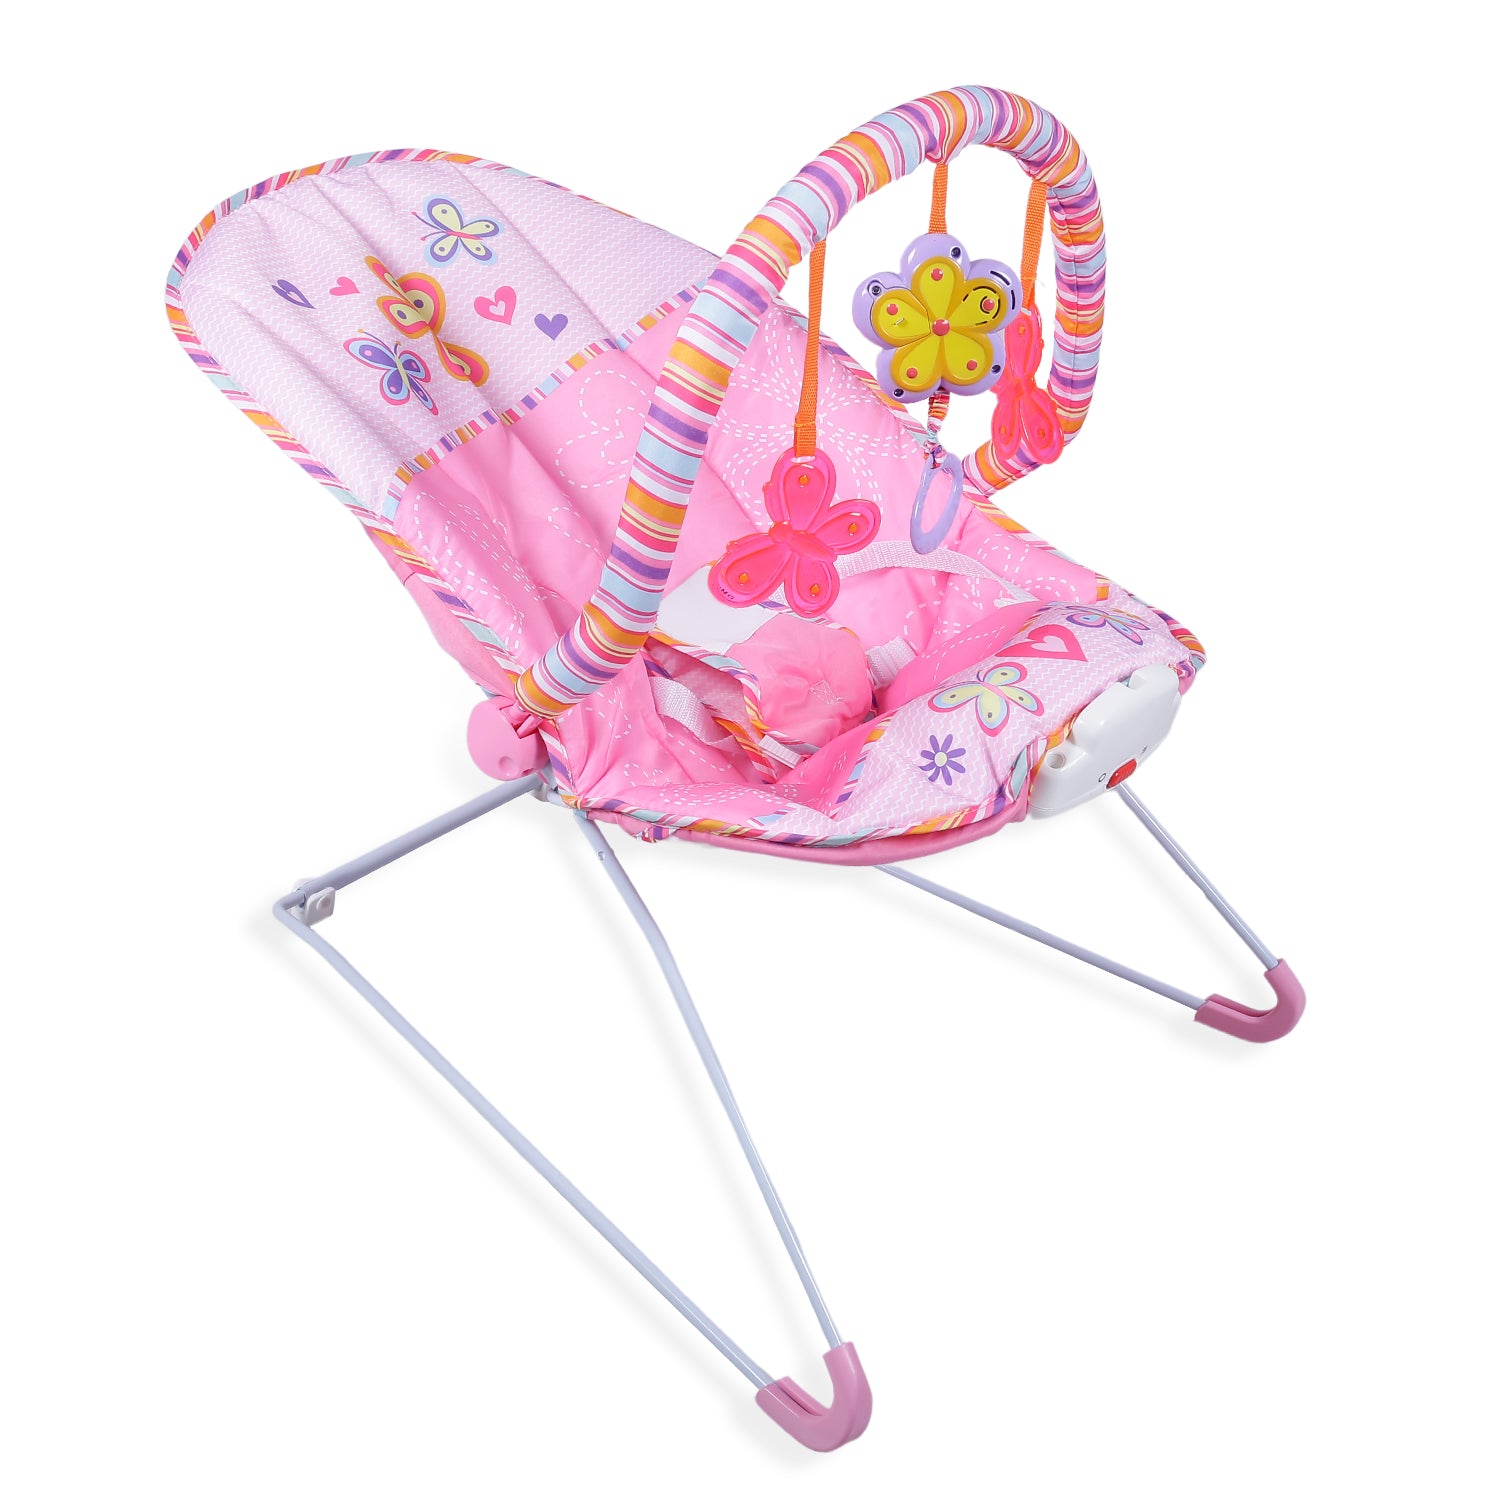 Jungle Friends Soothing Vibrations Bouncer Rocker With Musical Hanging Toys - Pink